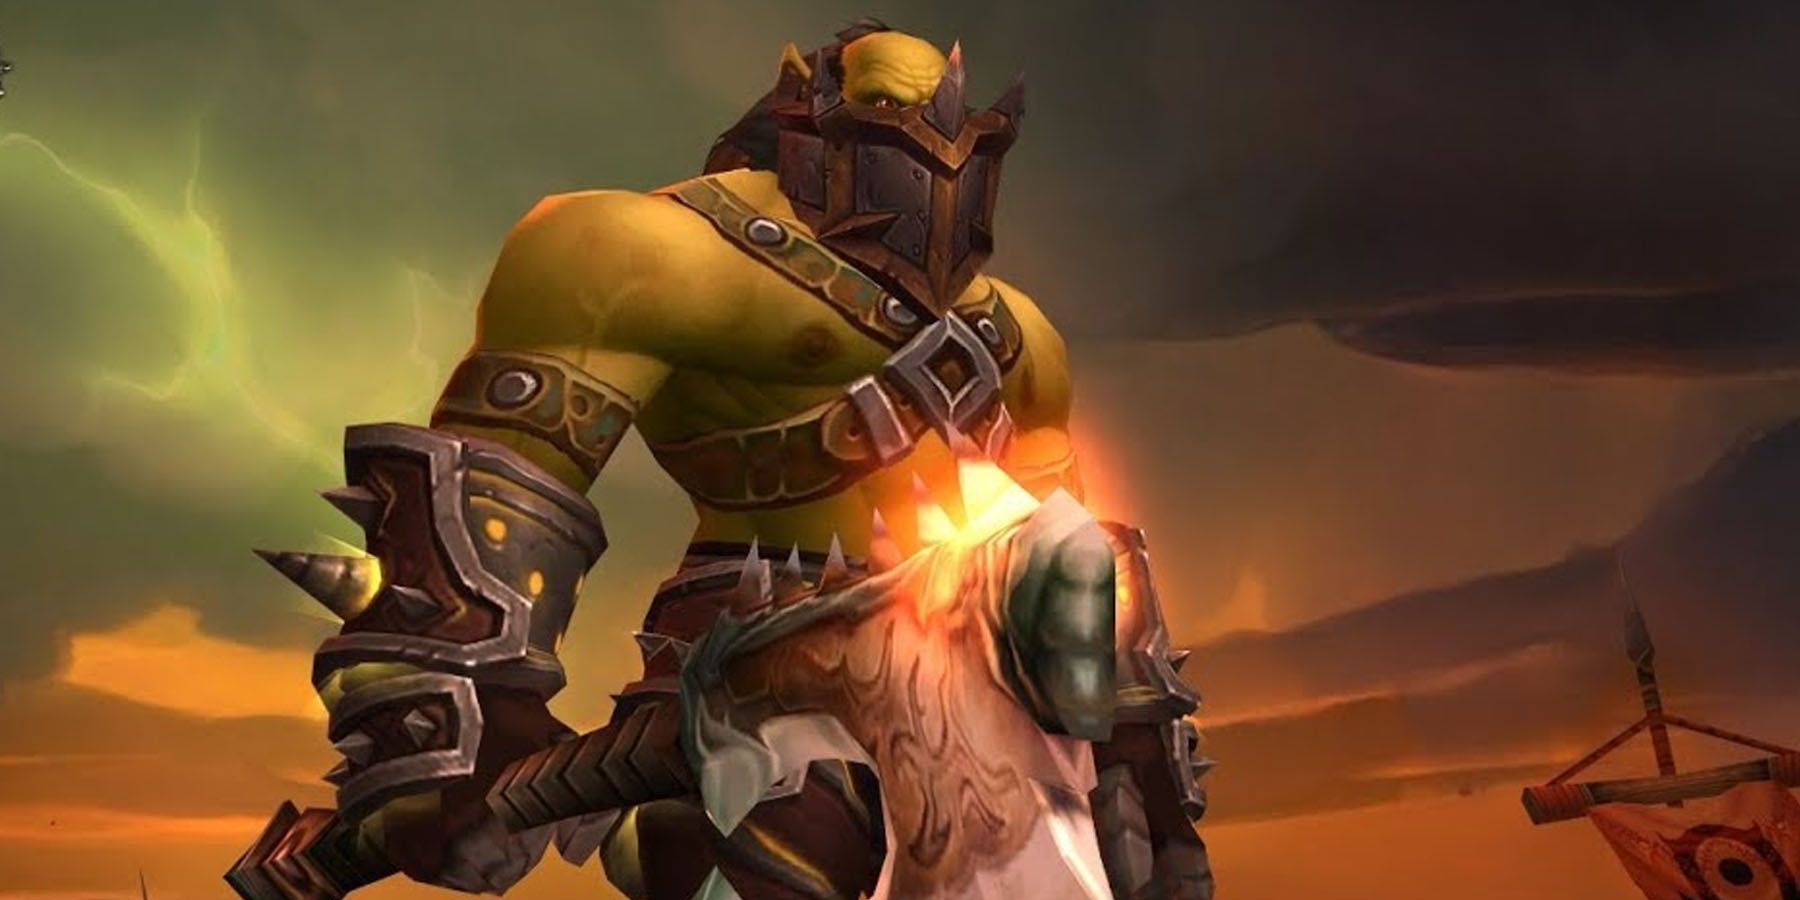 Arms Warrior in World of Warcraft